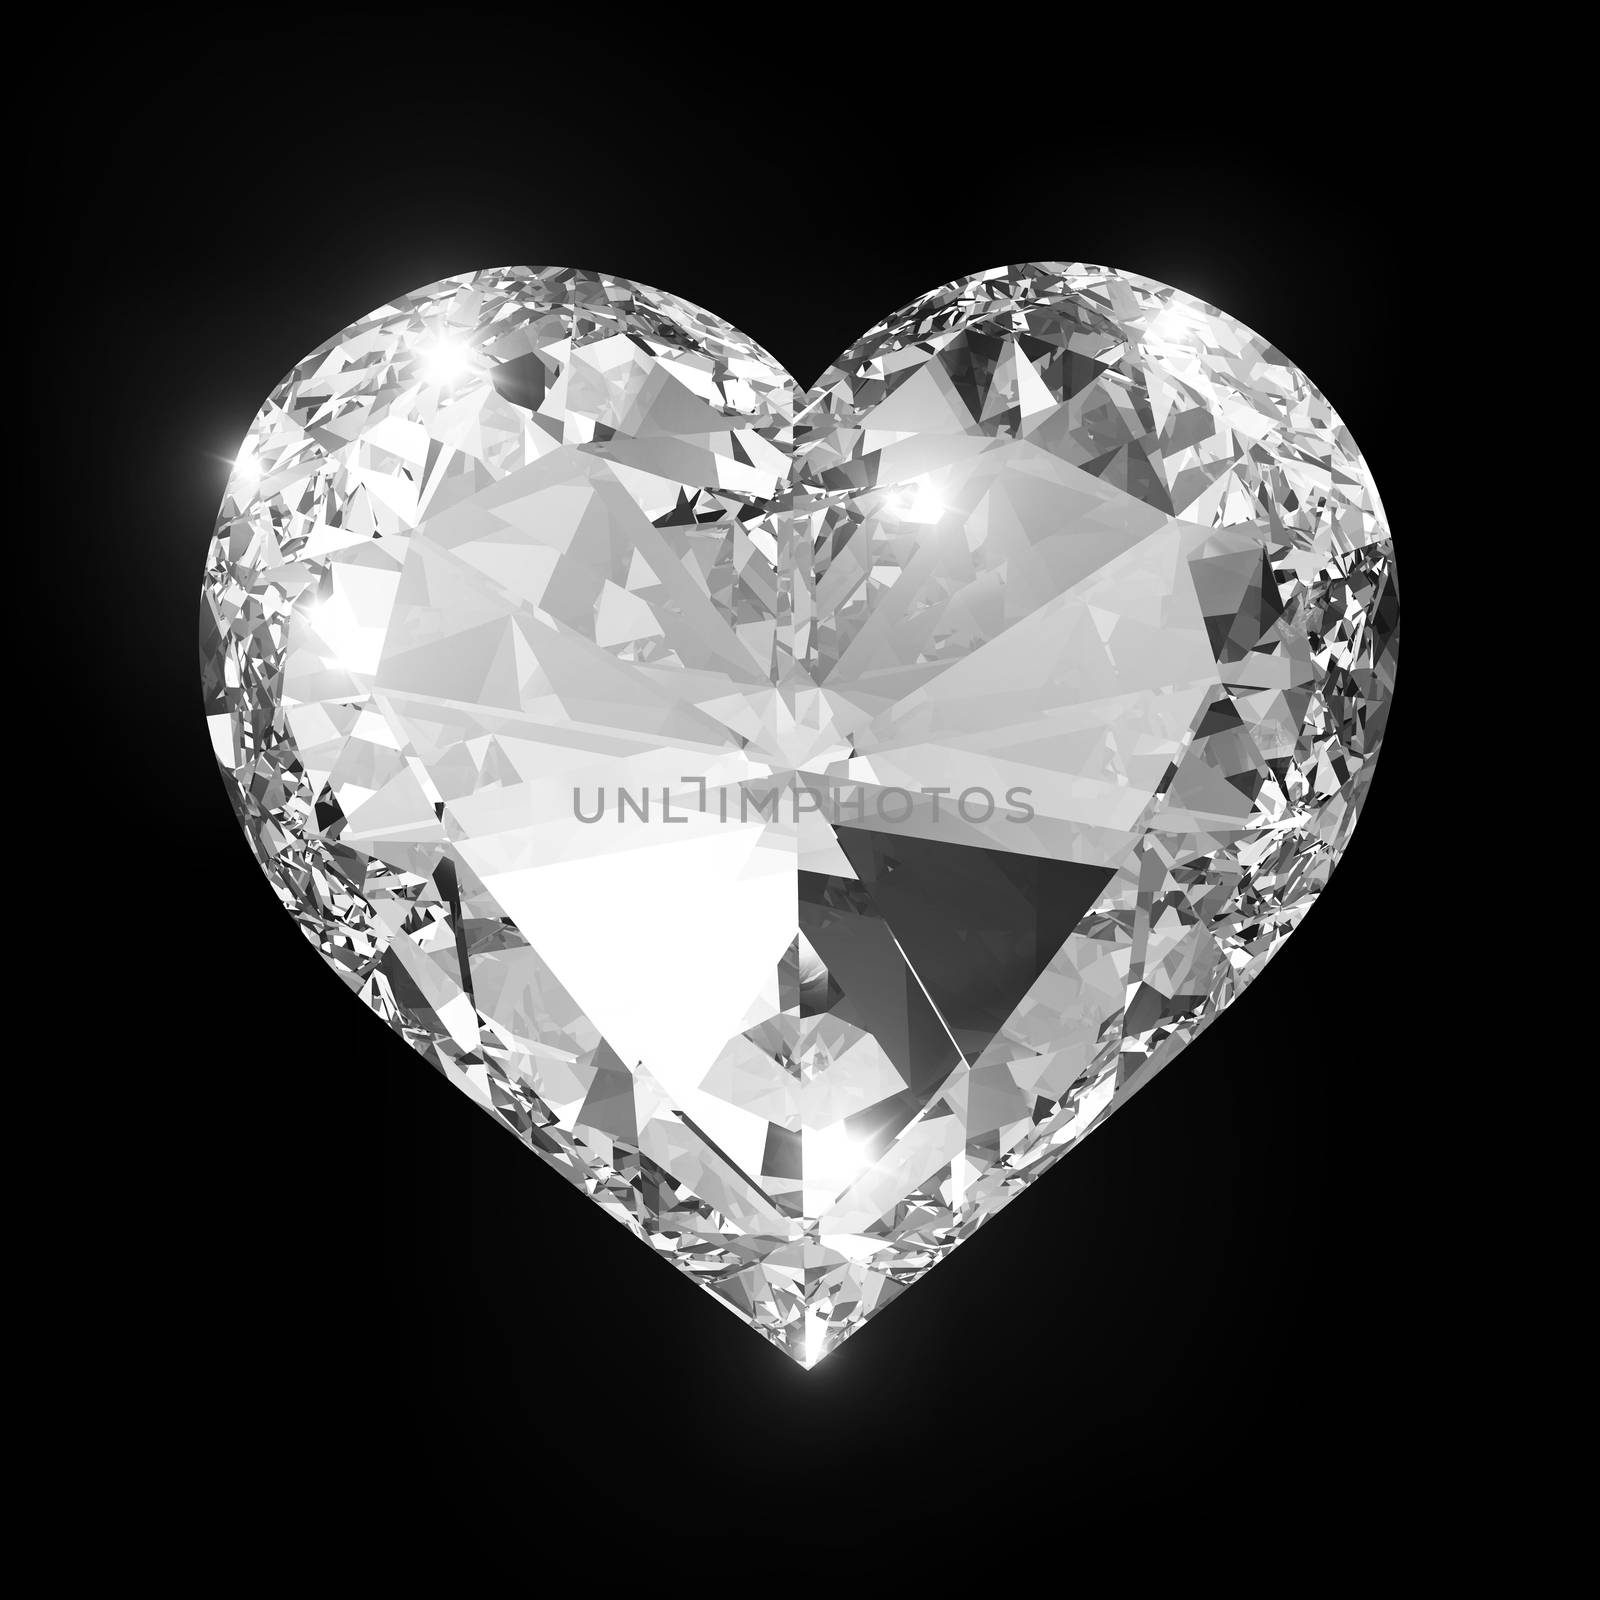 Diamond heart isolated with clipping path
